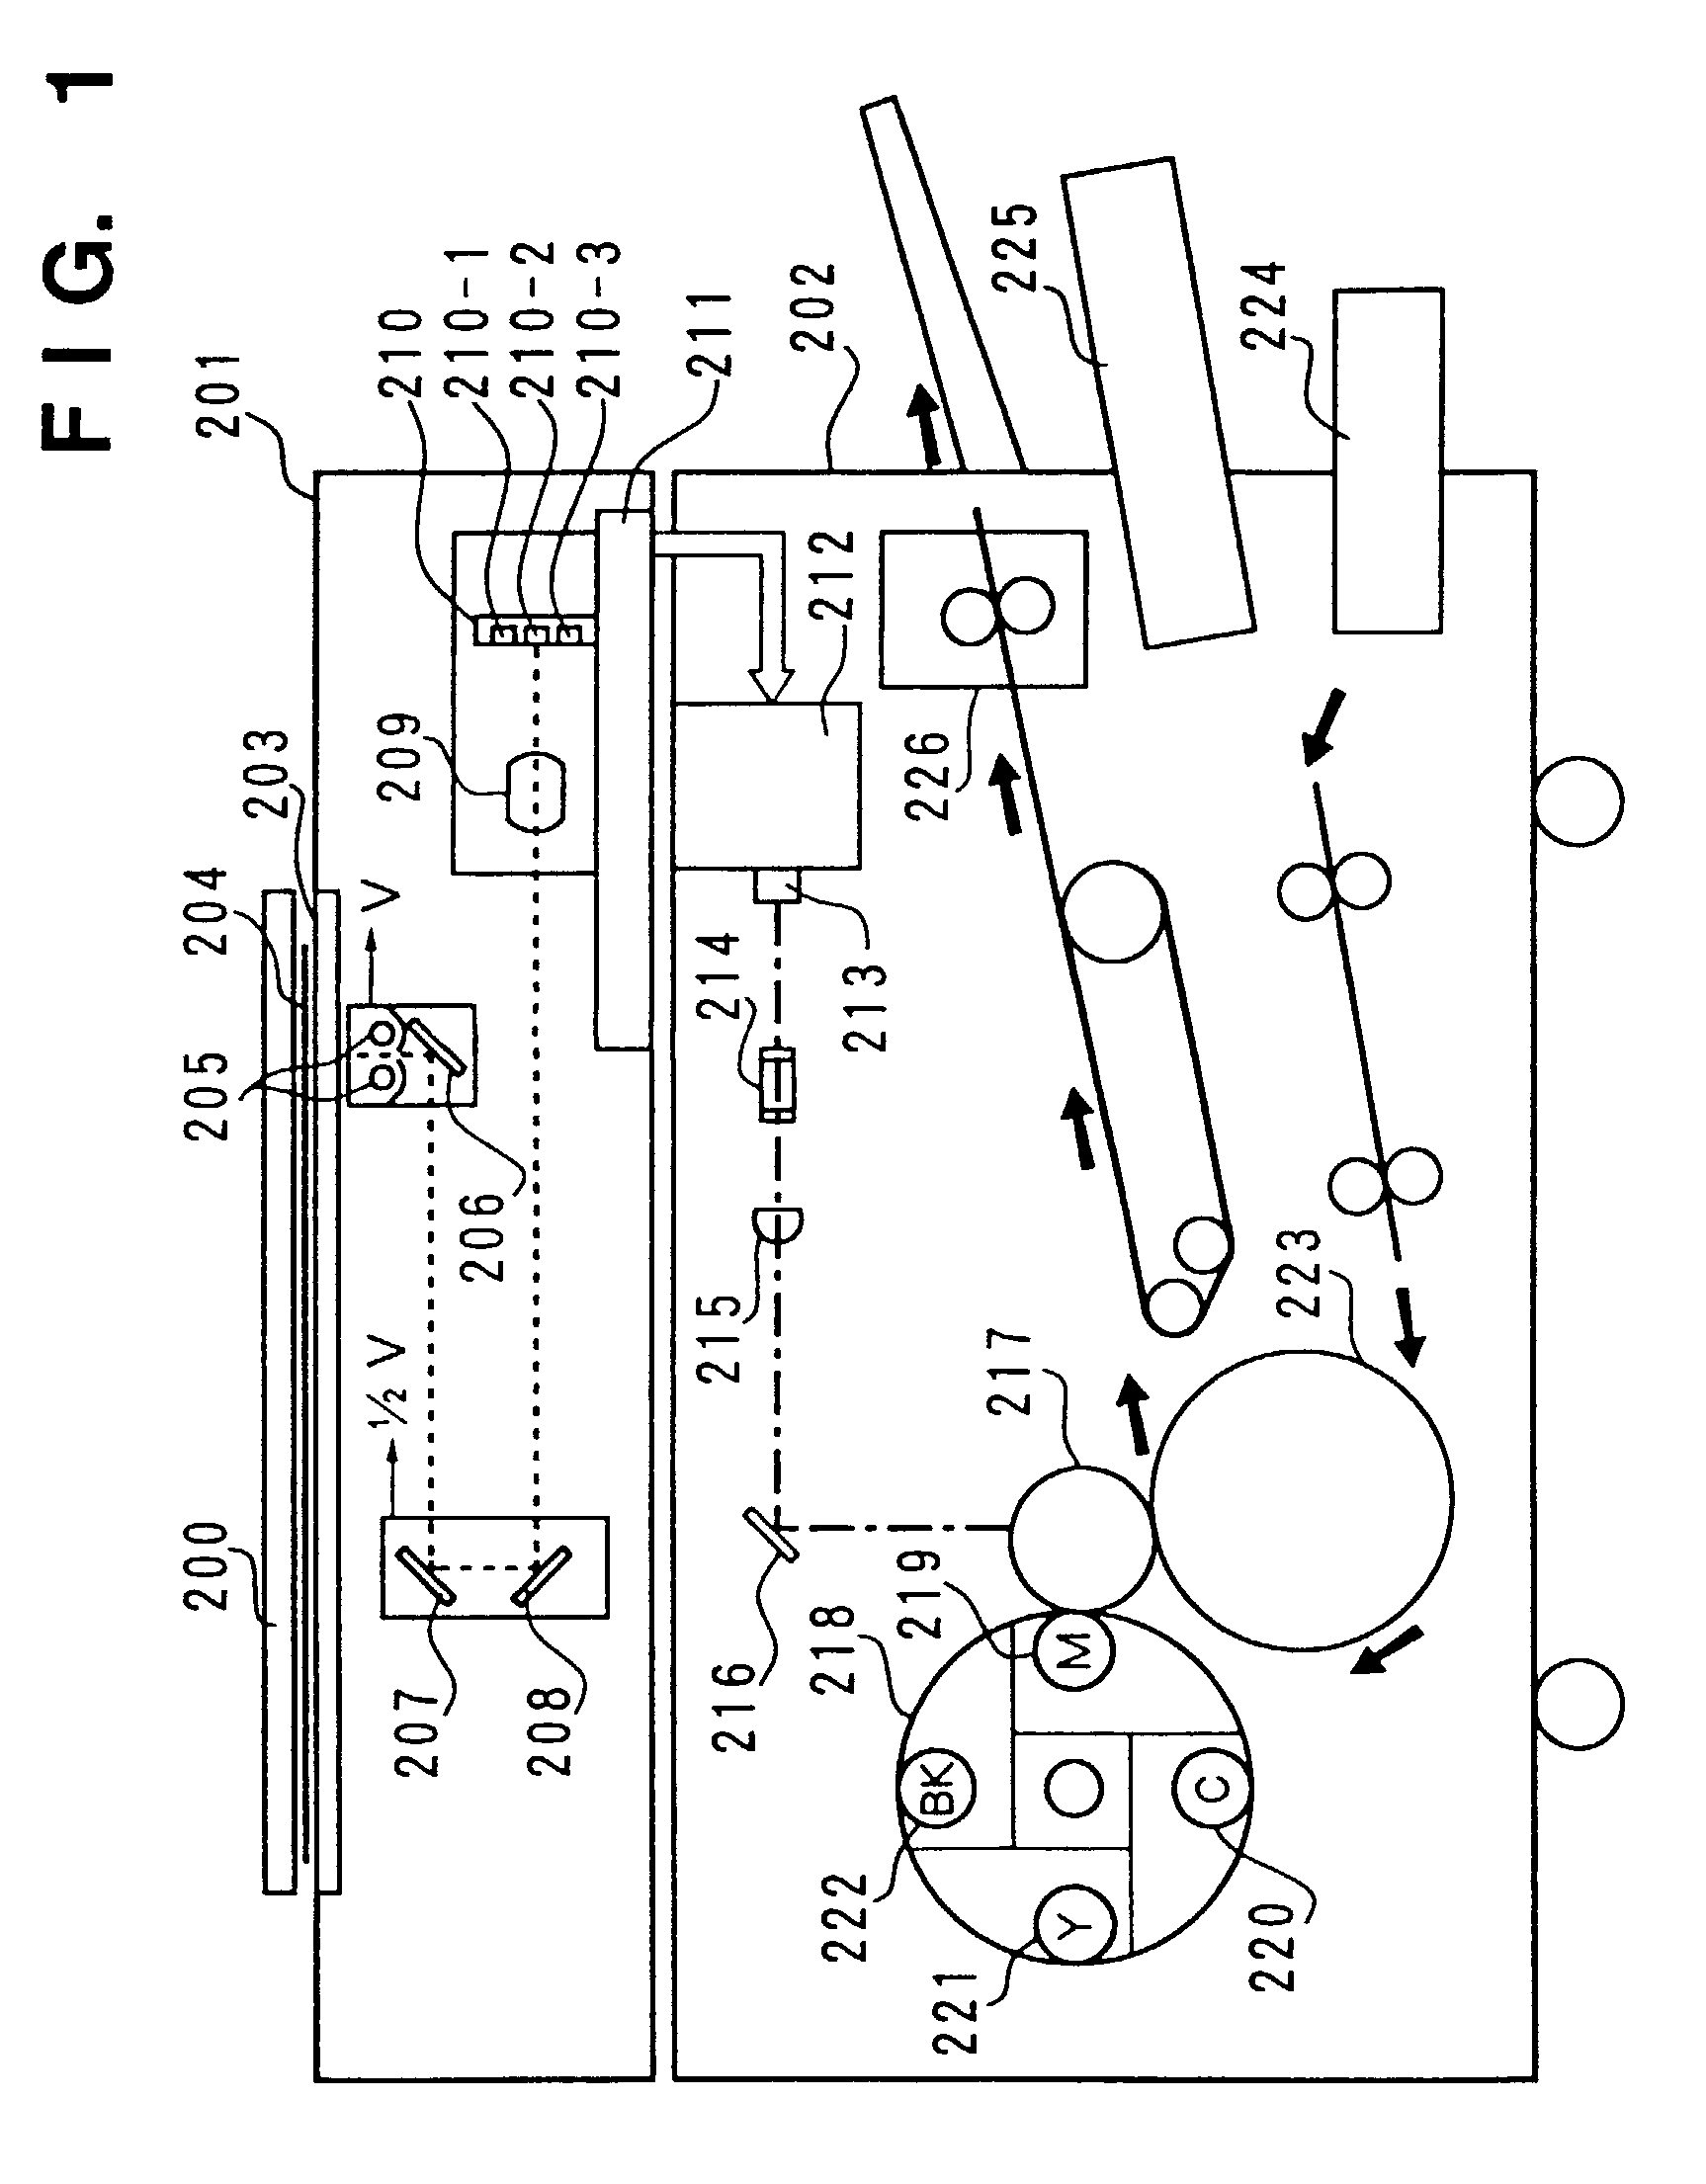 Image processing apparatus and method using image information and additional informational or an additional pattern added thereto or superposed thereon